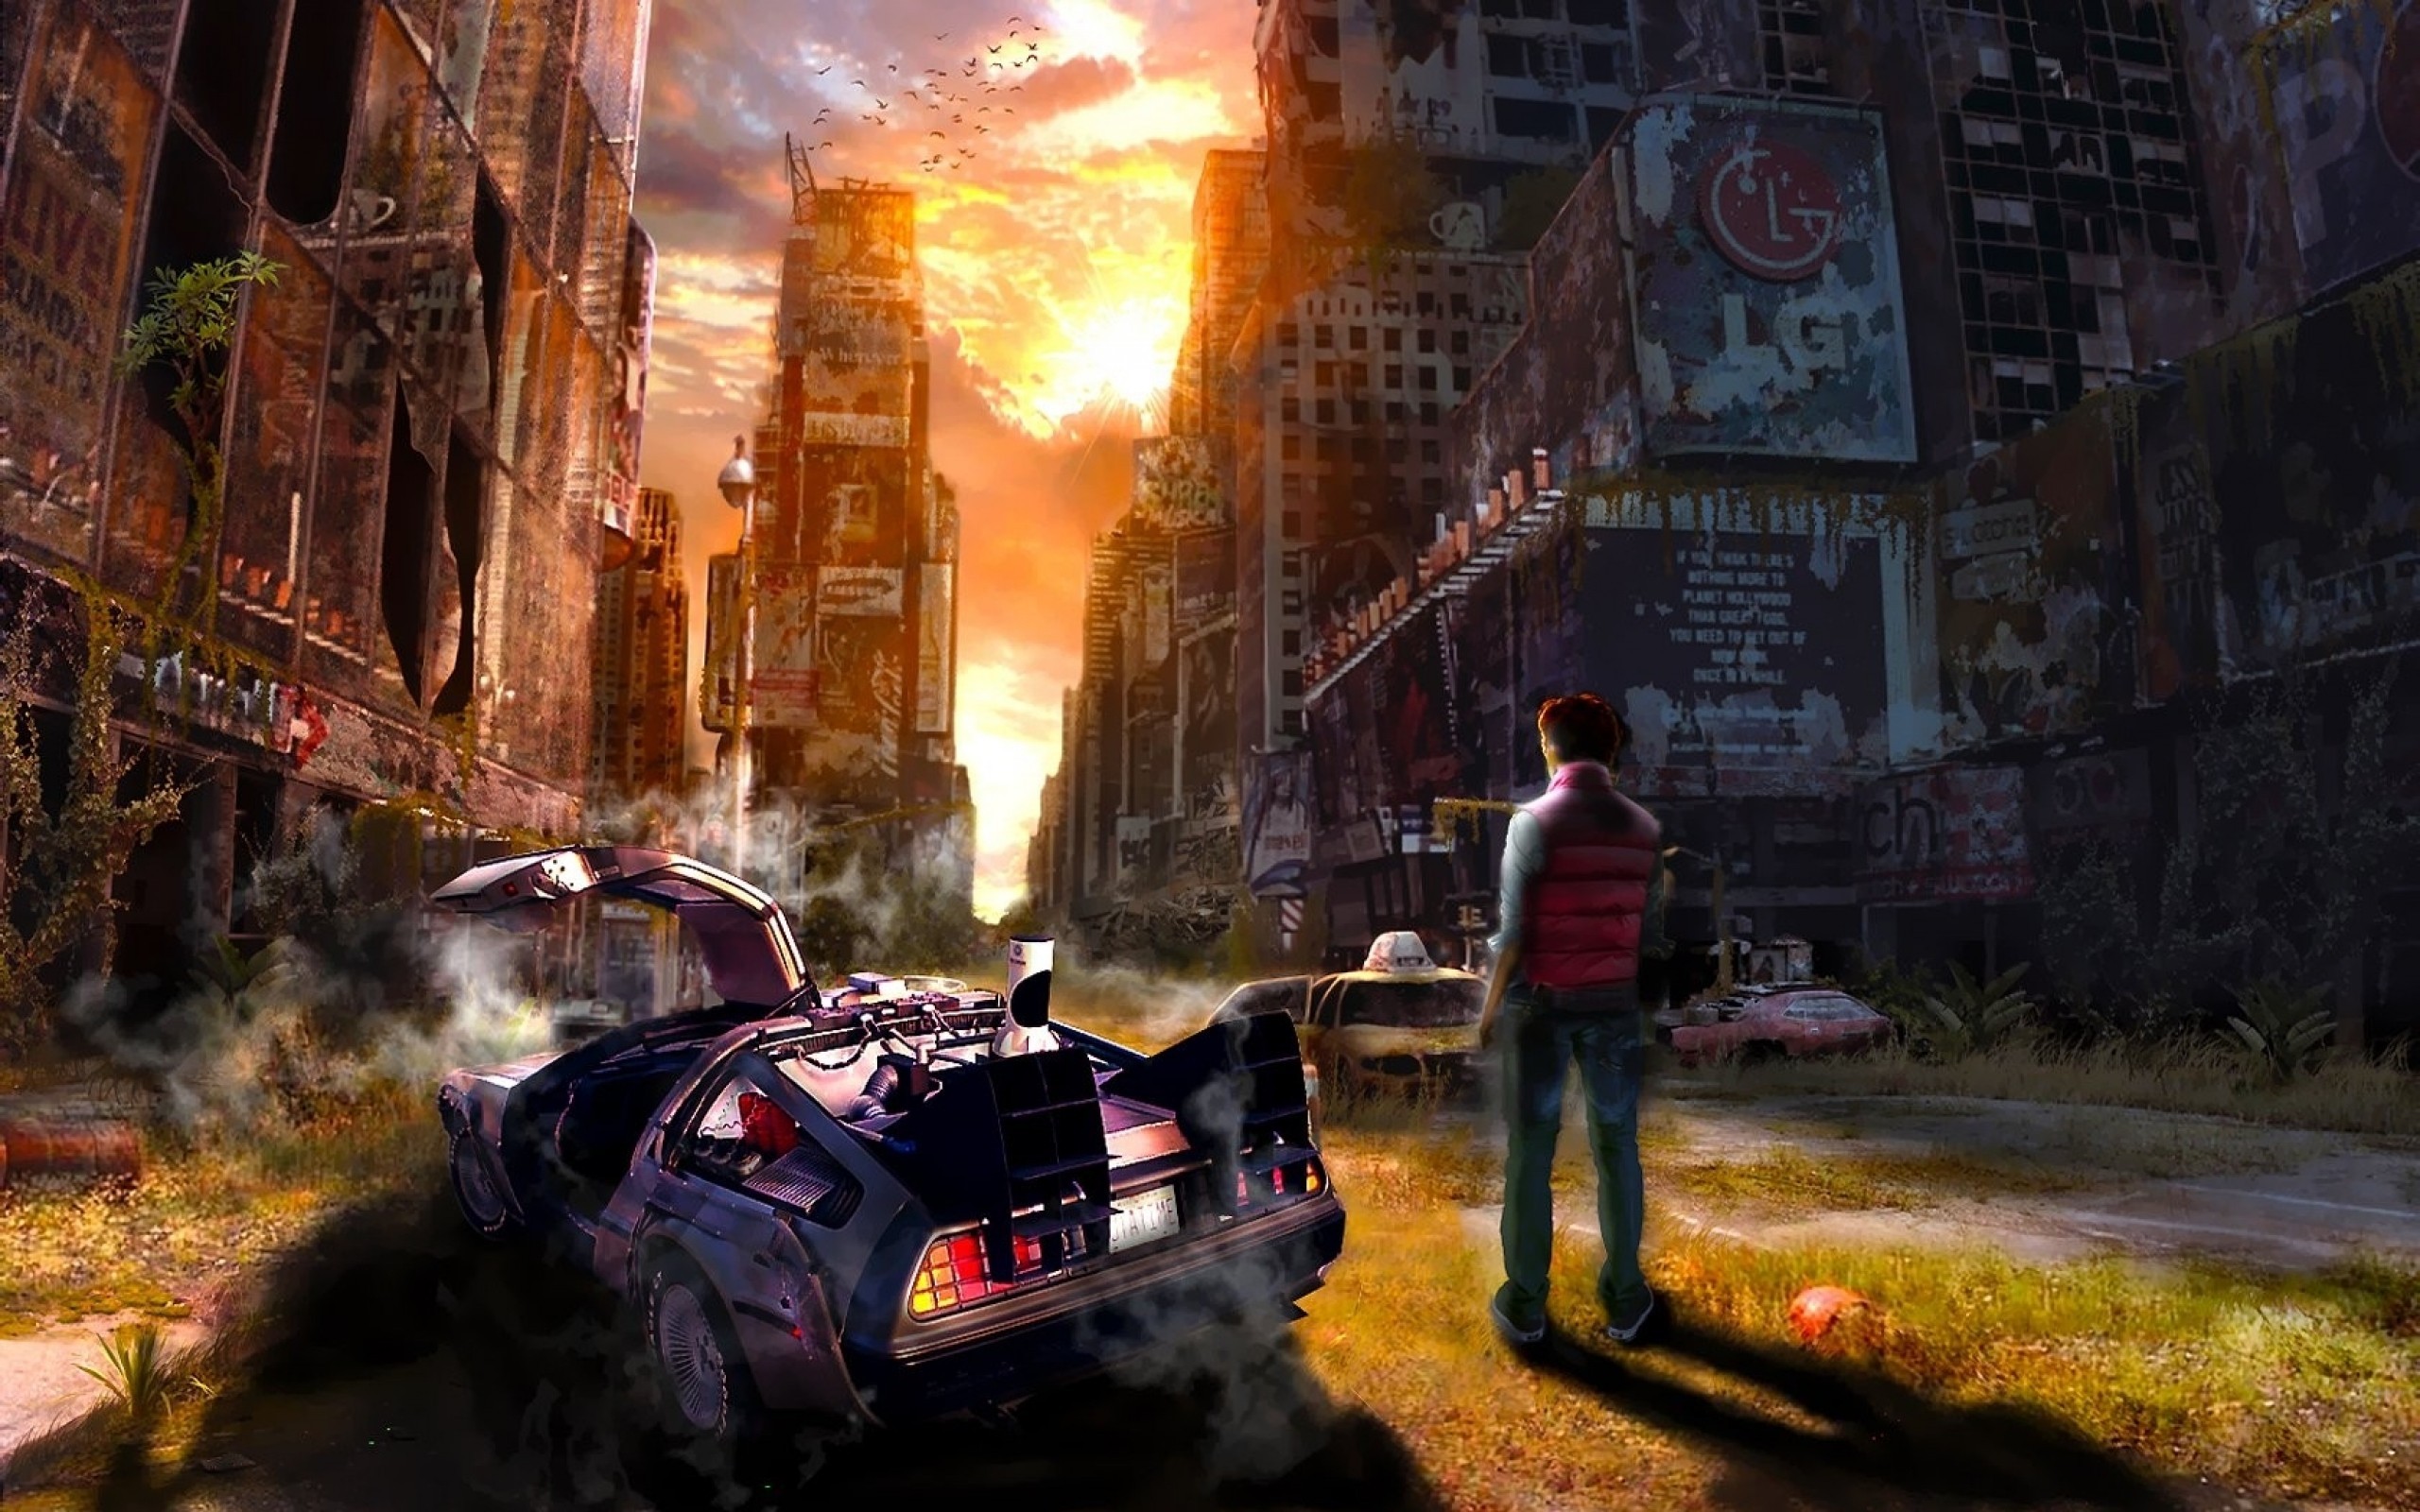 General 2560x1600 Back to the Future apocalyptic science fiction car vehicle DeLorean Marty McFly silver cars New York City sunlight sky artwork Time Machine dystopian time travel cityscape